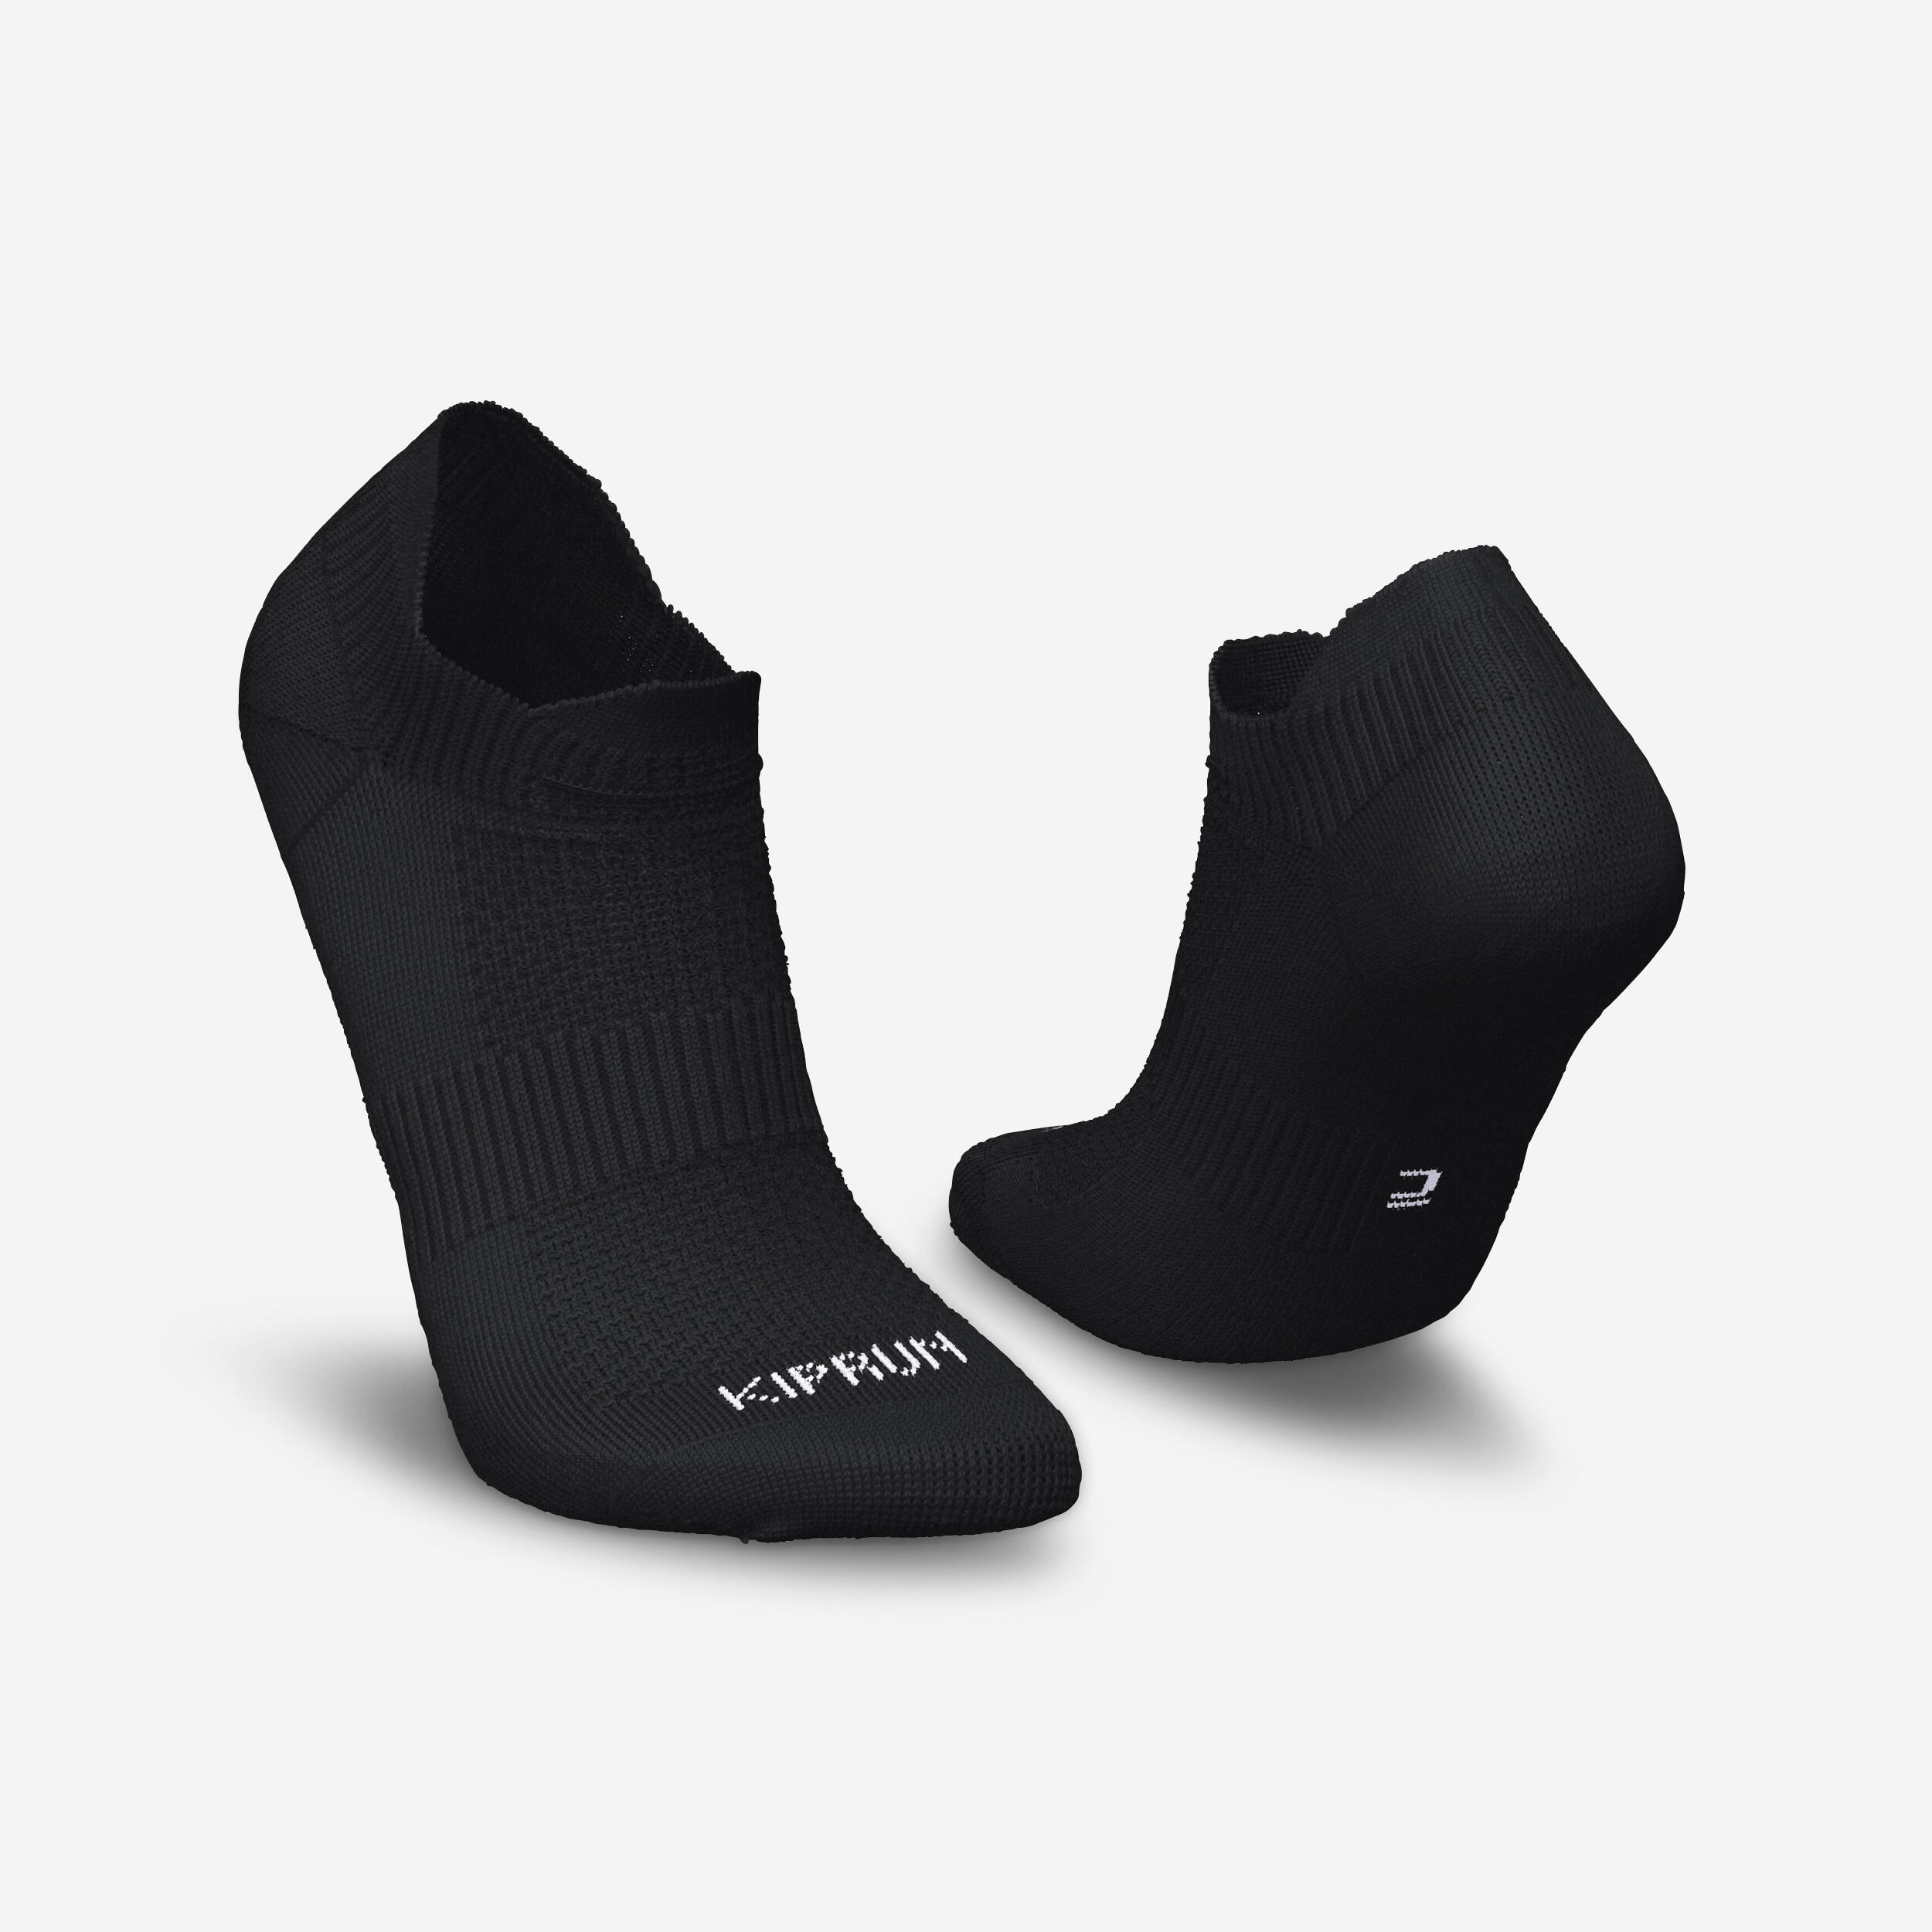 Non Slip Yoga Socks No Toes For Women Soft Silicone Ankle Sock With Anti  Friction Grip For Fitness, Gym, Dance, Pilates, Outdoor Cycling, Running,  And Jogging From Dandankang, $1.58